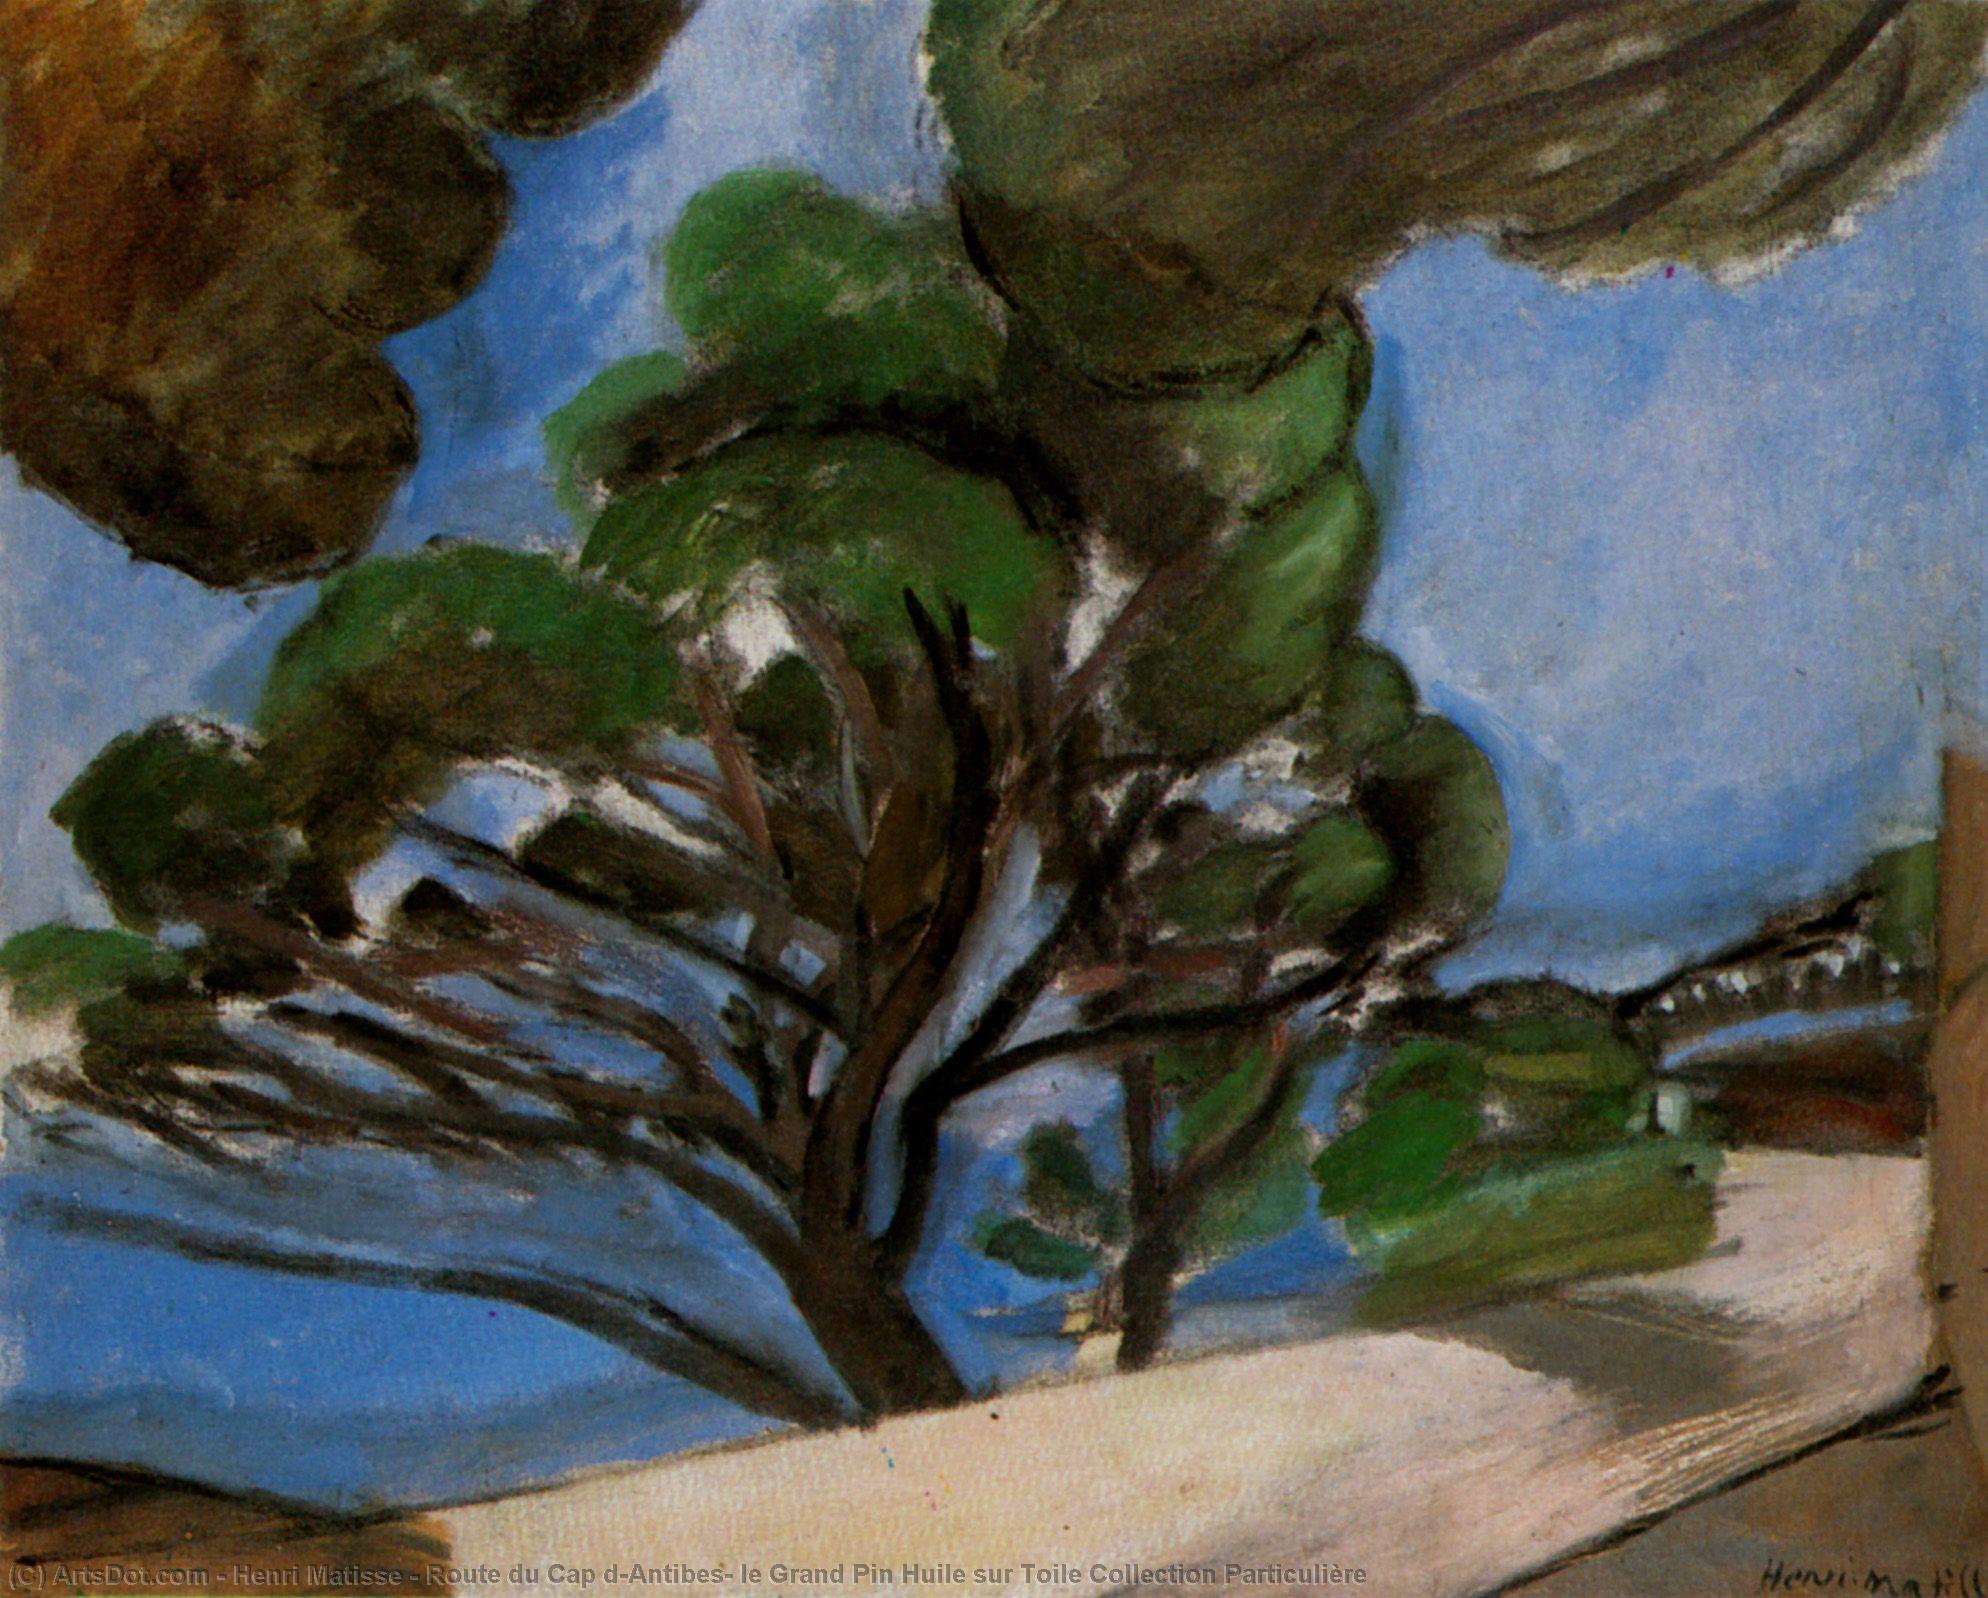 Wikioo.org - สารานุกรมวิจิตรศิลป์ - จิตรกรรม Henri Matisse - Route du Cap d'Antibes, le Grand Pin Huile sur Toile Collection Particulière